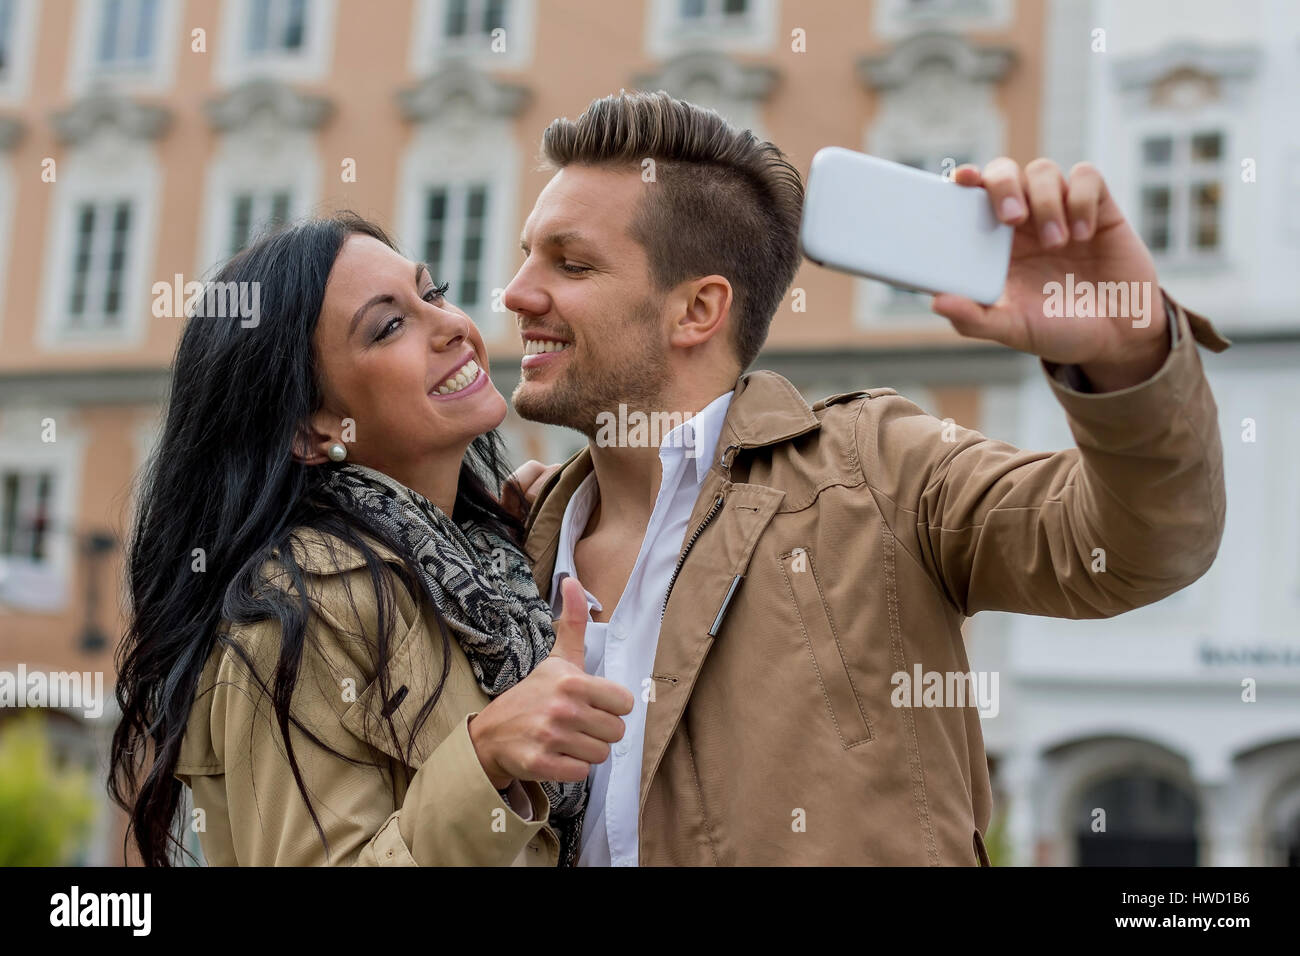 A young pair makes a selfportrait with a mobile phone. Selfies are in., Ein junges Paar macht ein Selbstporträt mit einem Handy. Selfies sind in. Stock Photo